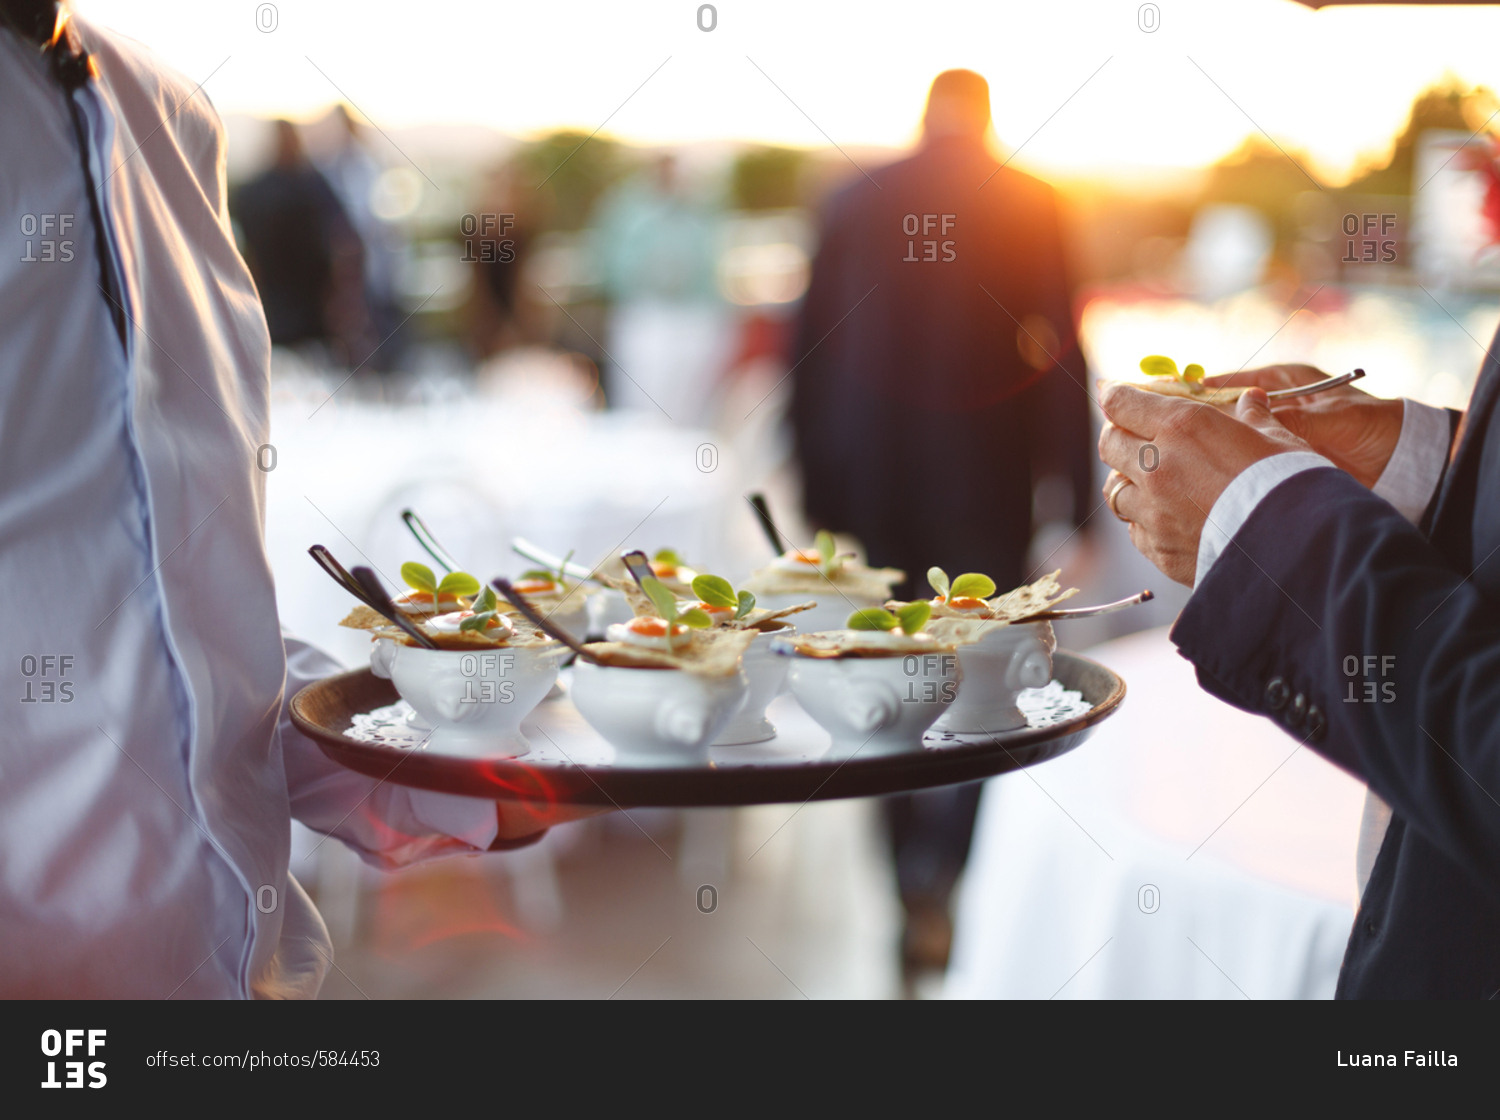 Waiter holding a serving tray with hors d\'oeuvres in small dishes